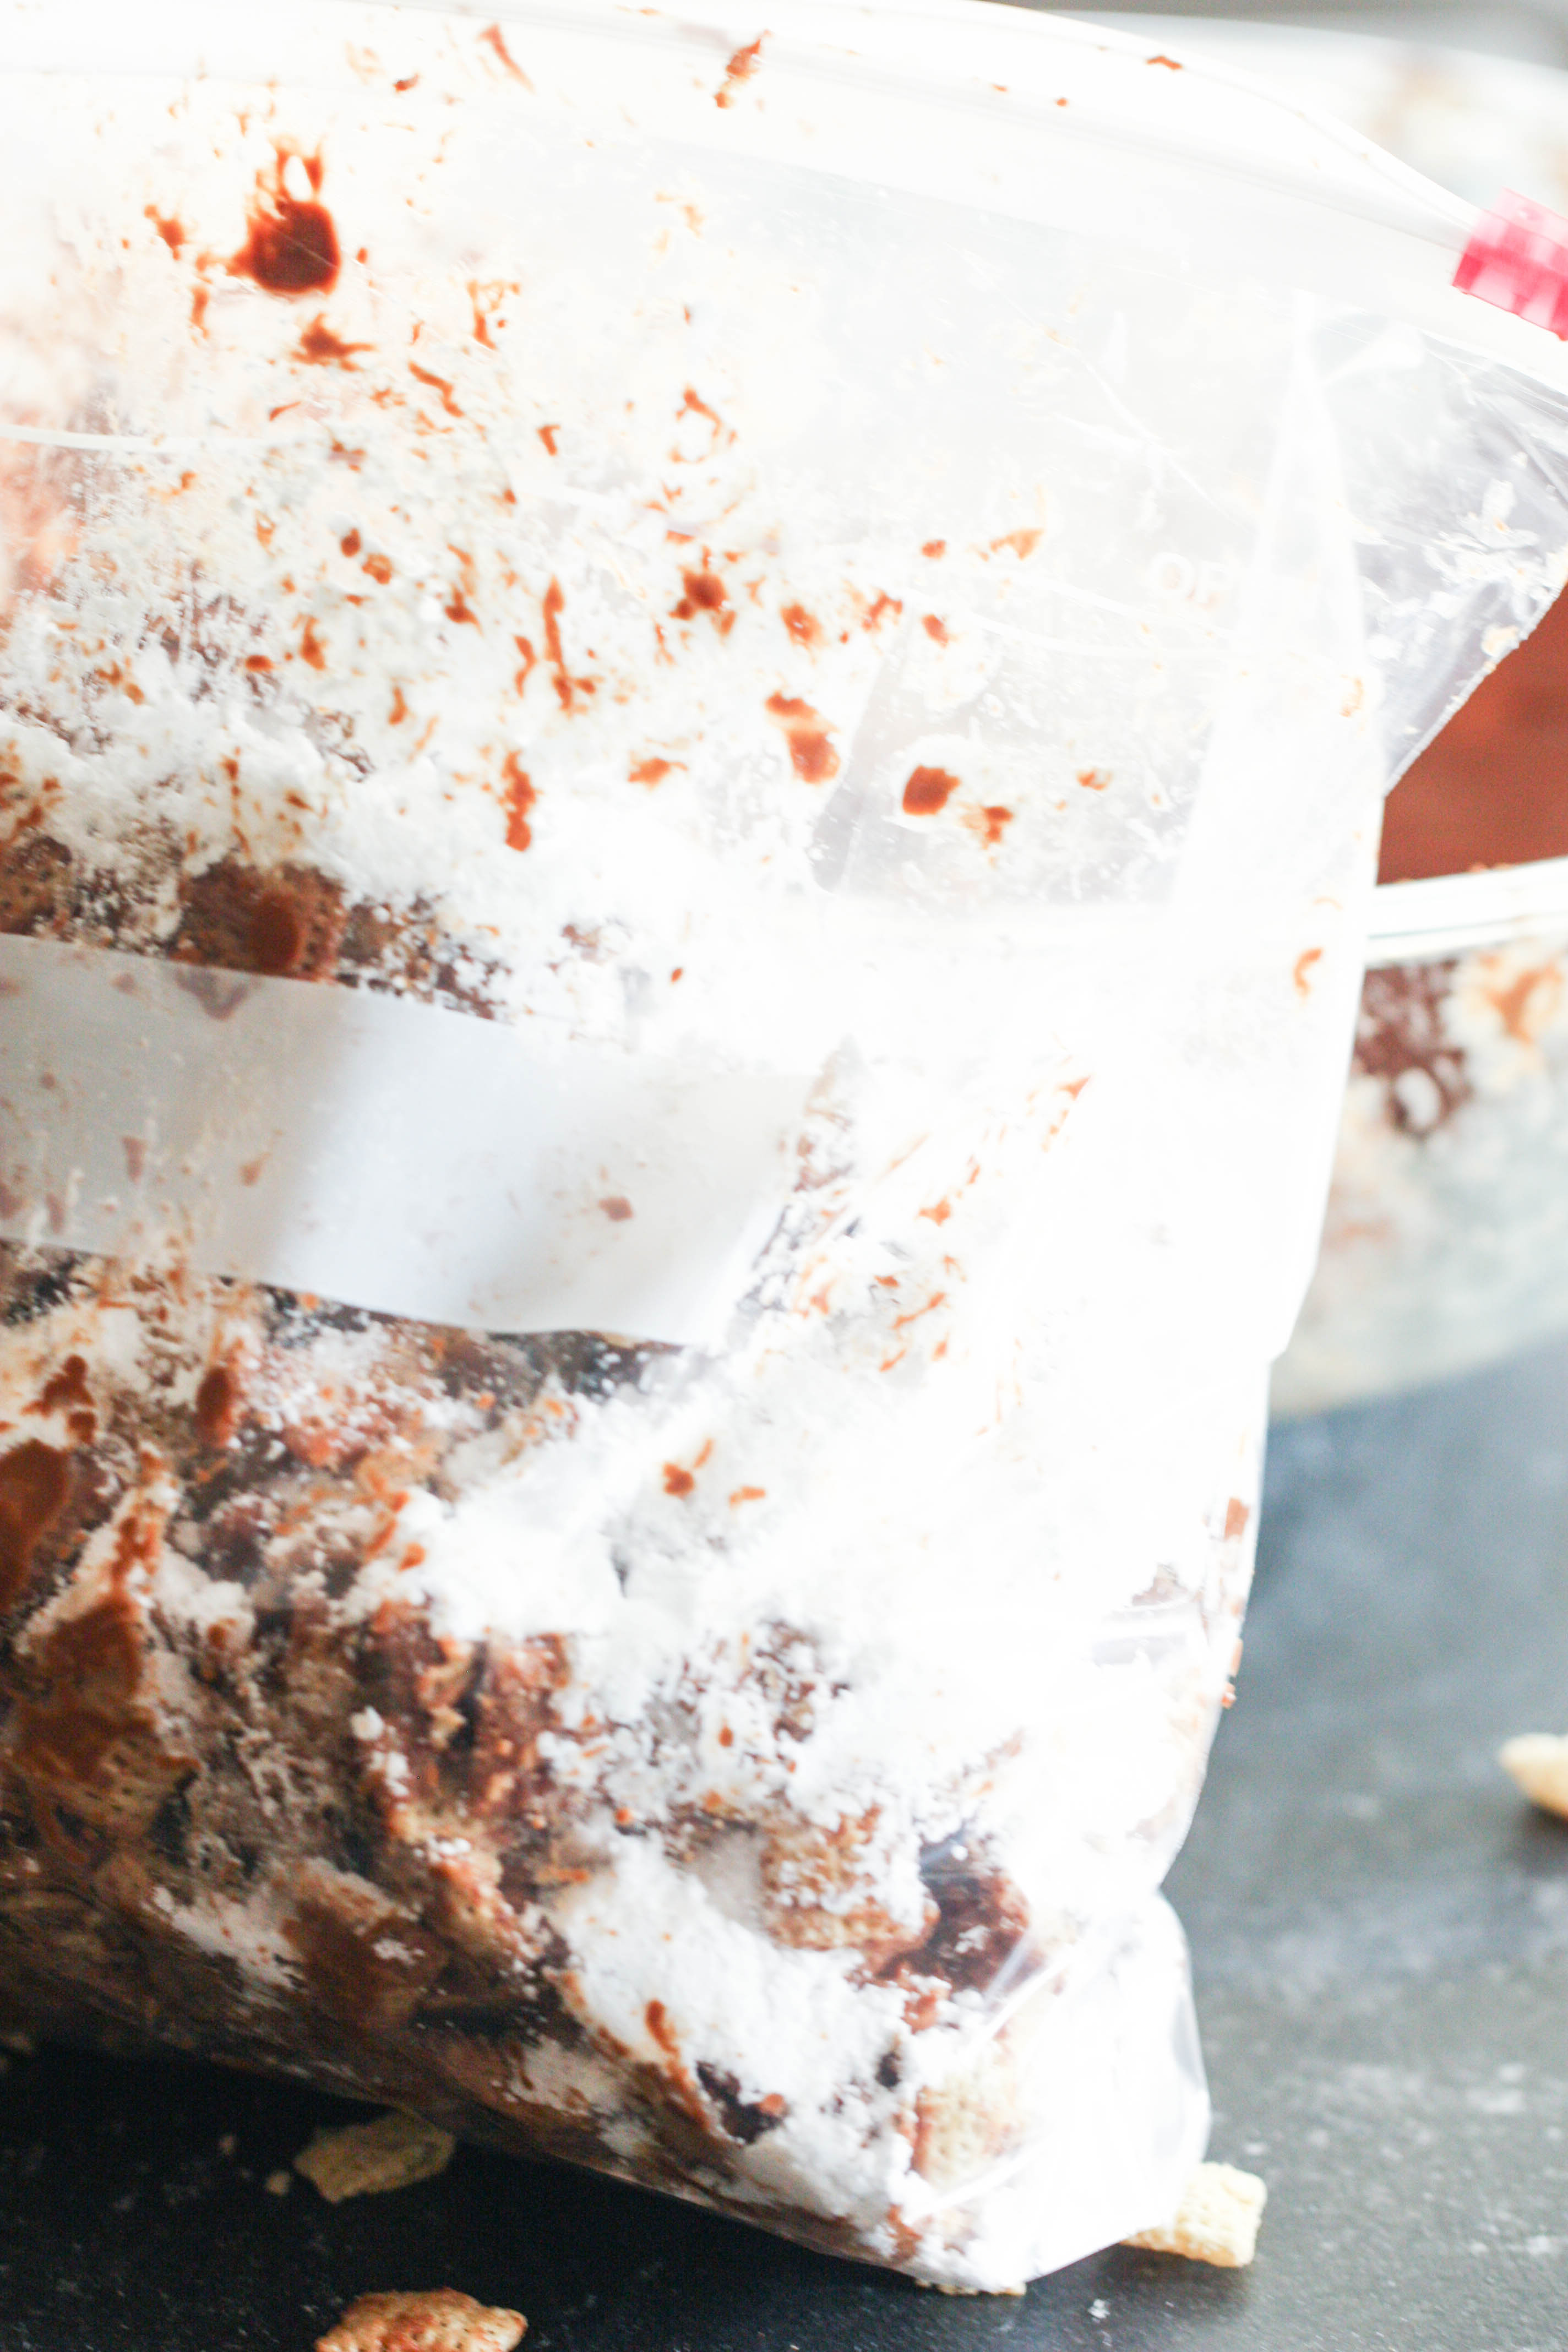 Coating Chex Mix with powdered sugar in a ziploc bag